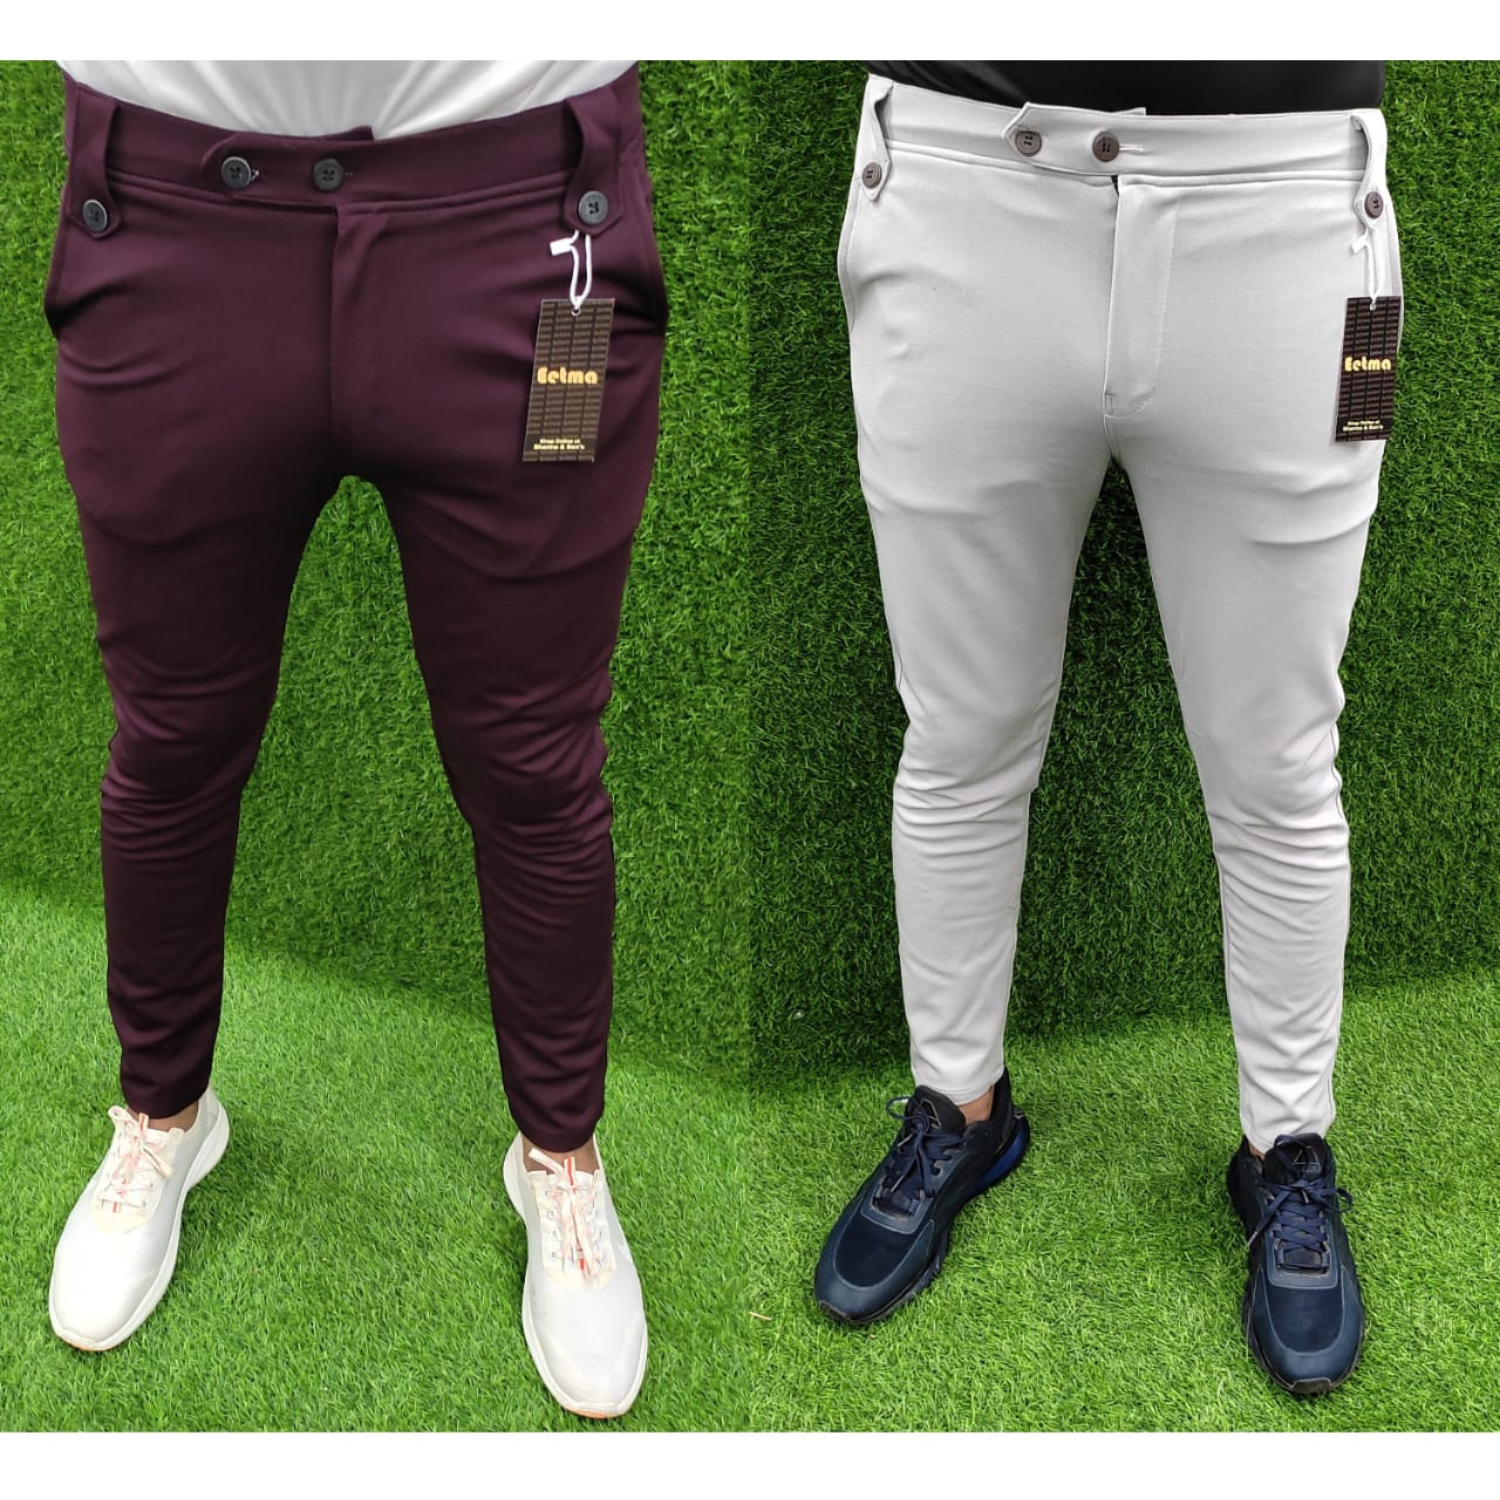 Eetma Comfortable and Stylish Trousers 